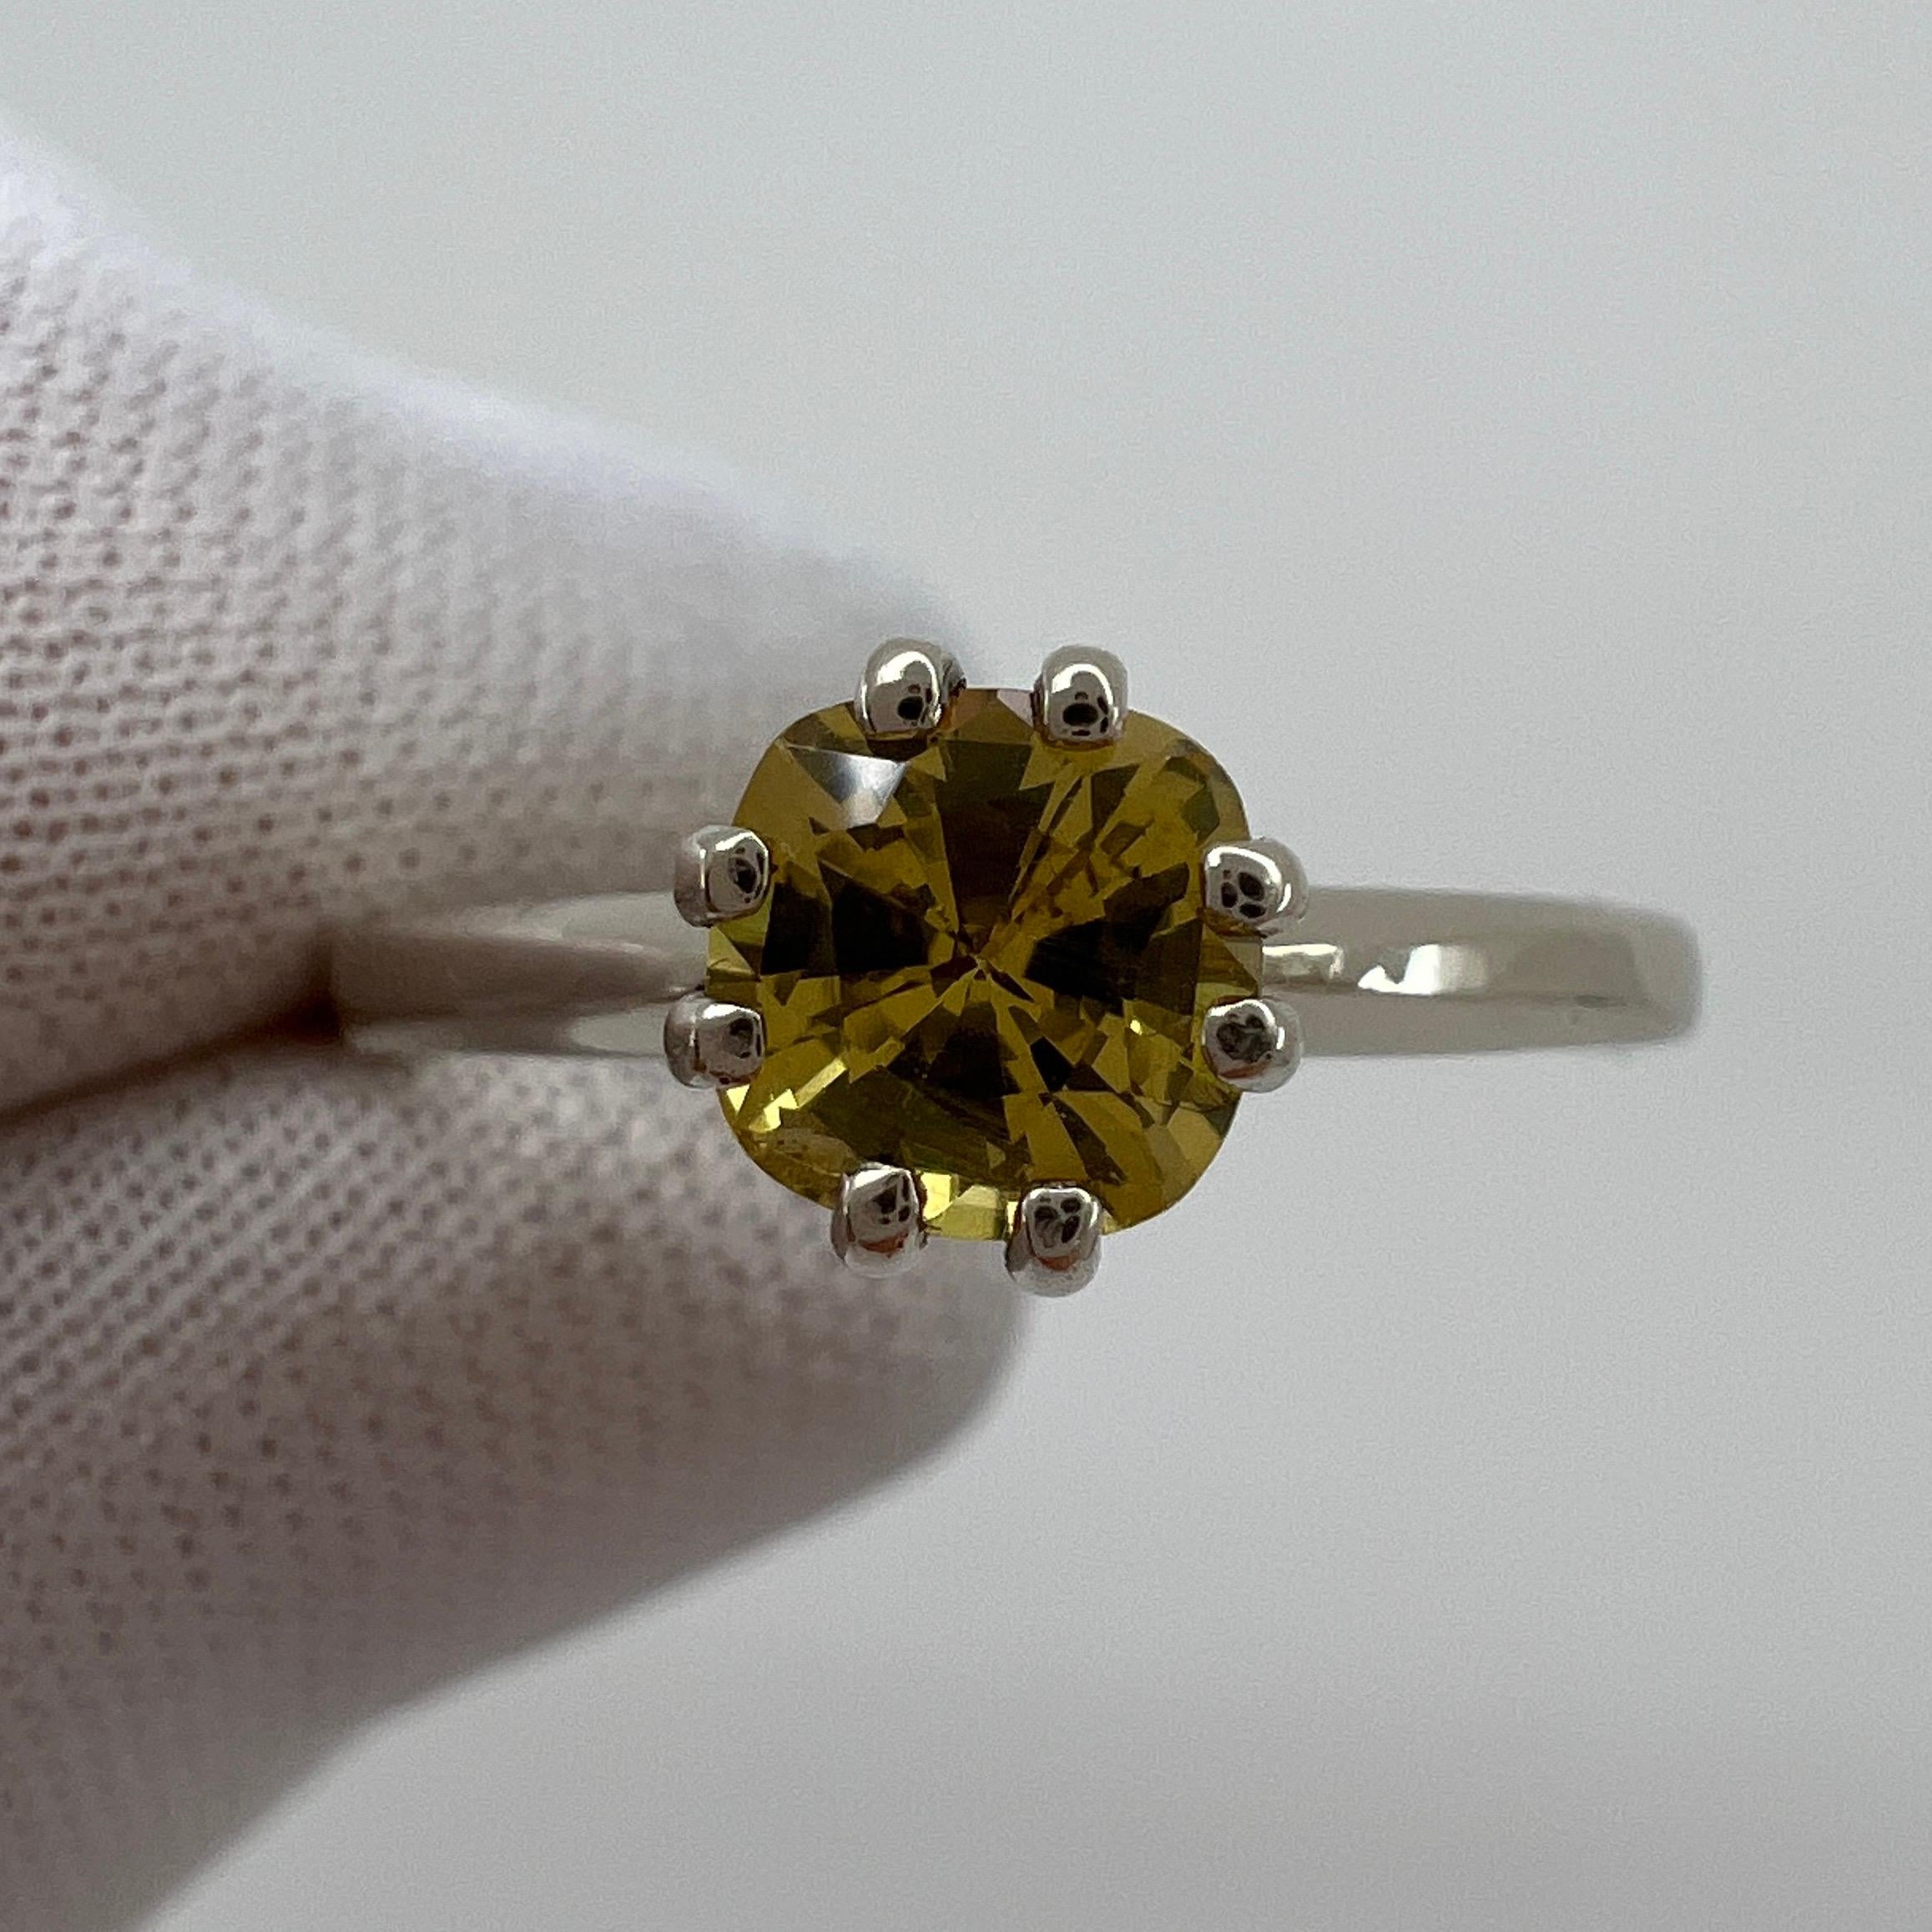 Fine Vivid Yellow Orange Sapphire Cushion Cut White Gold Solitaire Ring.

Stunning bright yellow-orange sapphire with a fine vivid colour and superb 'ideal' cut. Set in a beautiful 14k white gold solitaire ring.

0.70 Carat stone with excellent